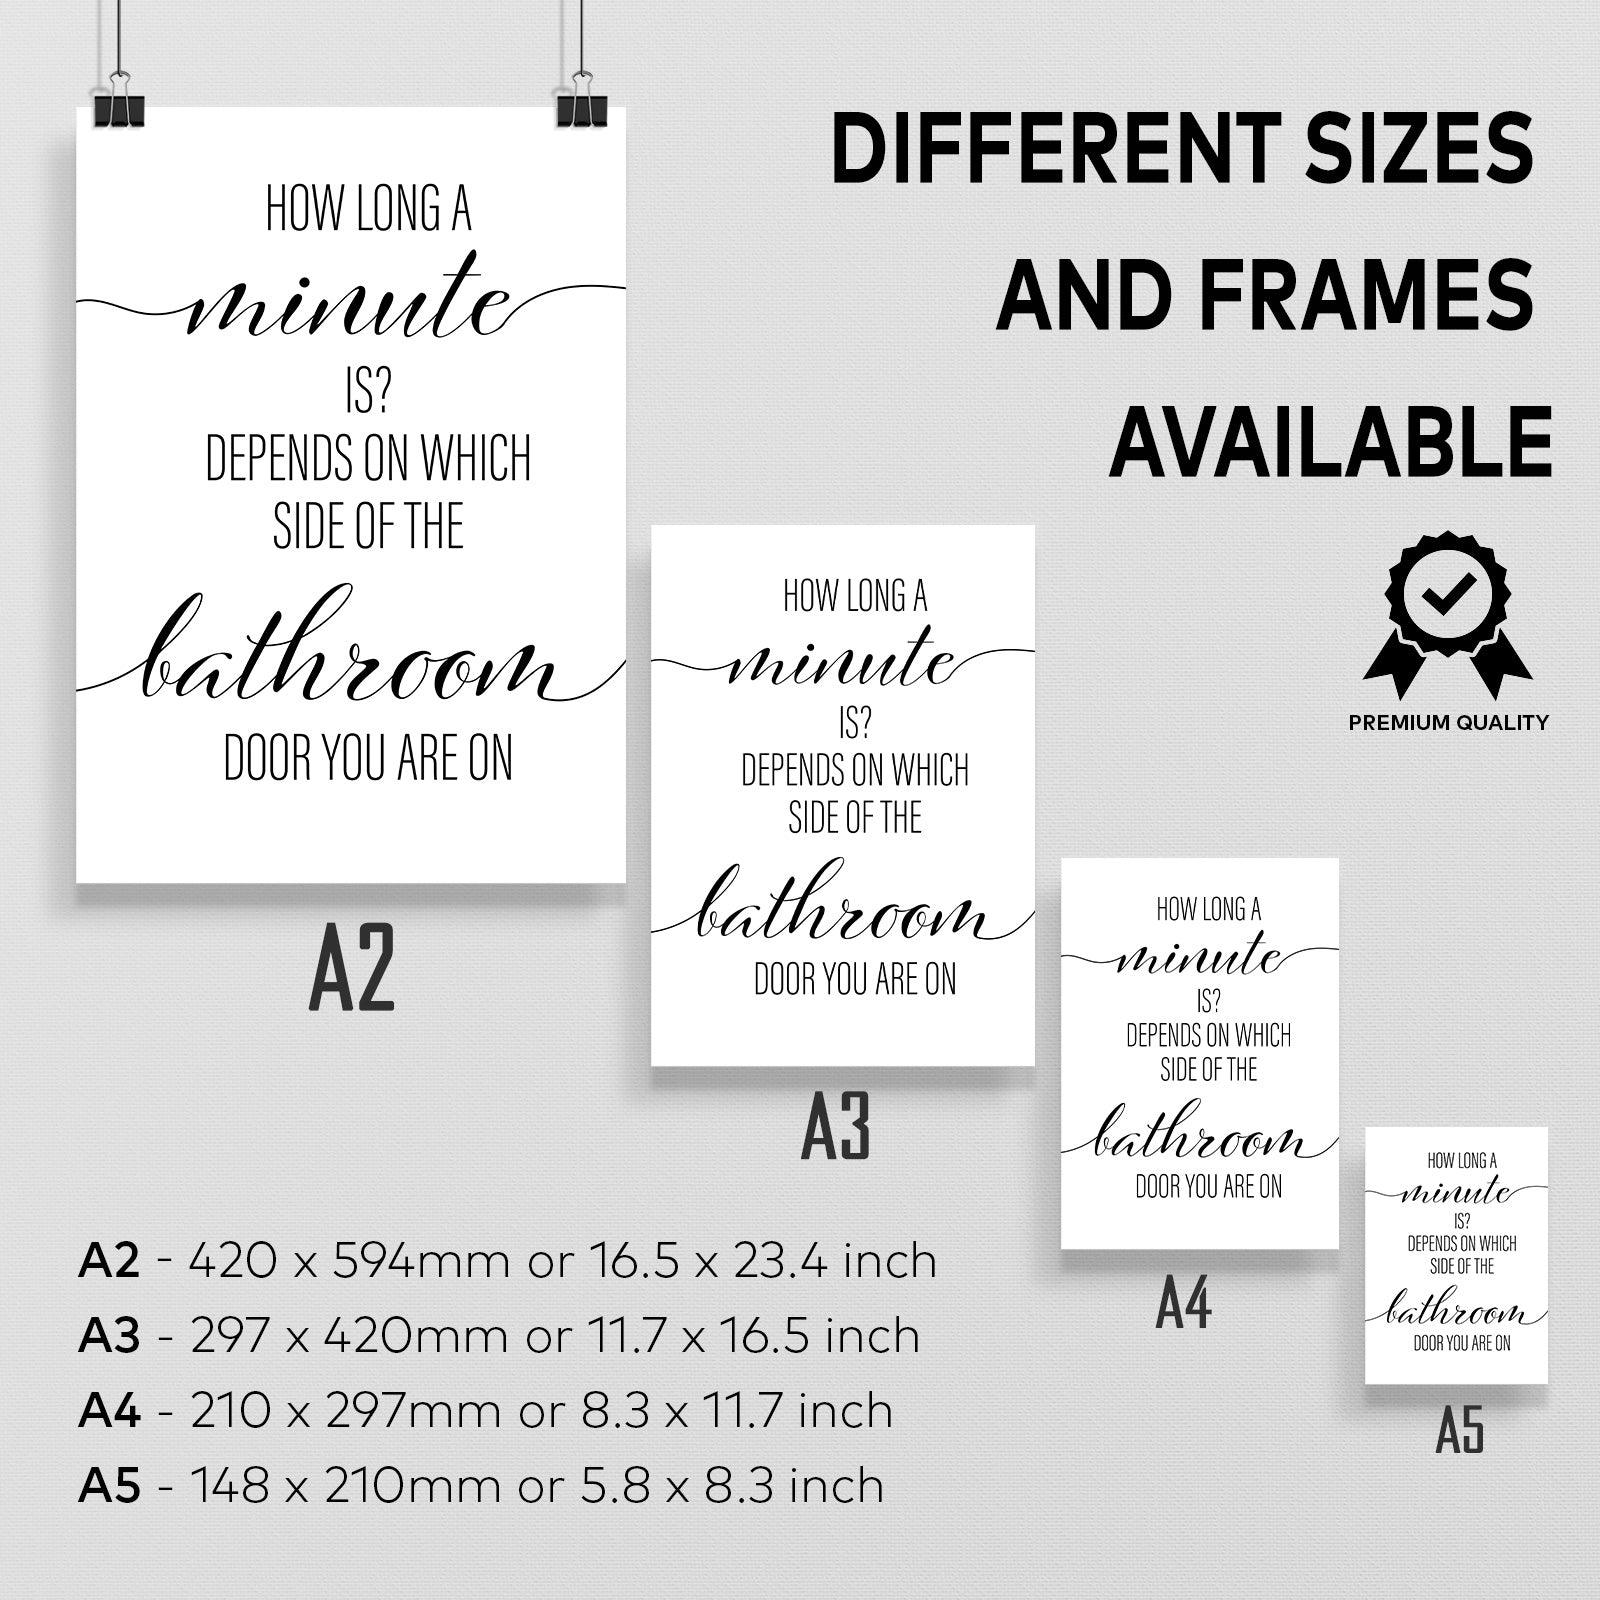 How Long A Minute Is Depends On Which Side Of The Bathroom Door You Are On A4 A3 A2-Vintage Wall Art Home Decor - Kuzi Tees